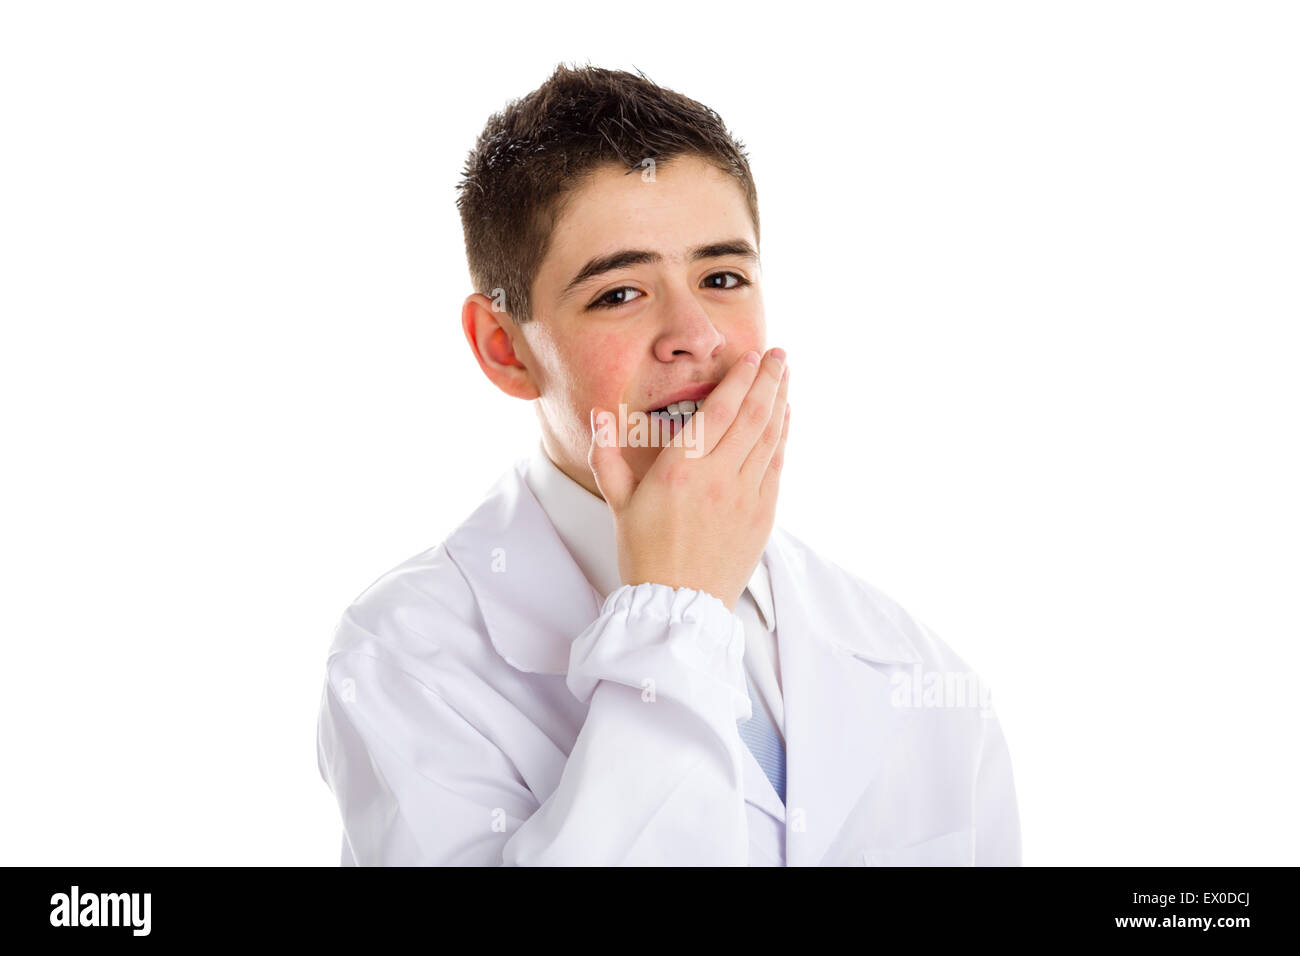 child dressed as a doctor in light blue tie and white coat helps to feel medicine more friendly: he is yawning while covering mouth with hand. His acne skin has not ben retouched Stock Photo